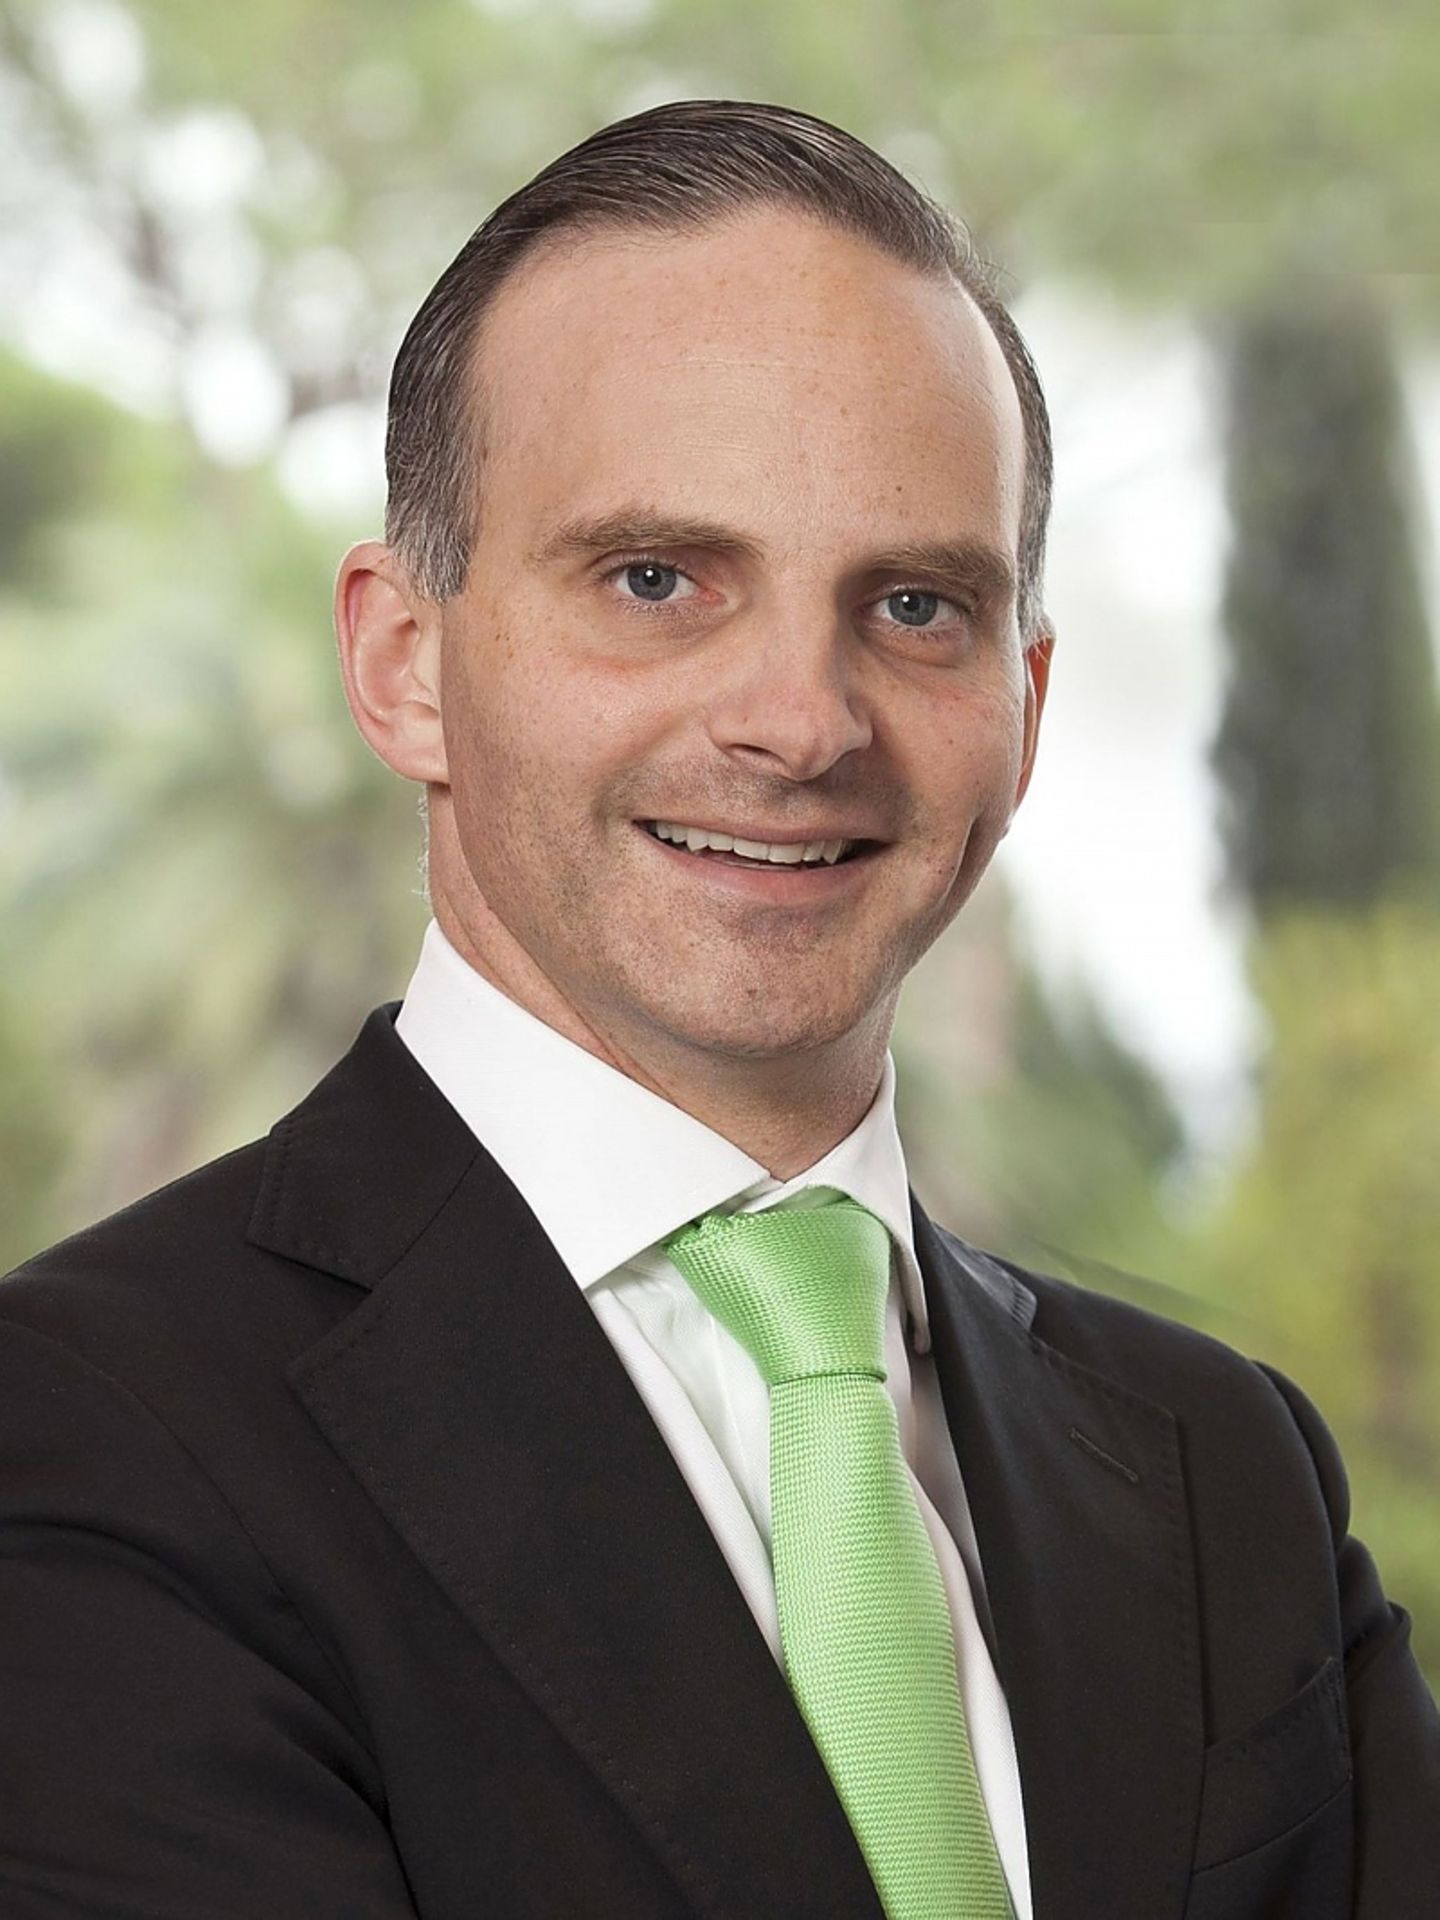 Alexander Weiss, head of global energy consulting at McKinsey